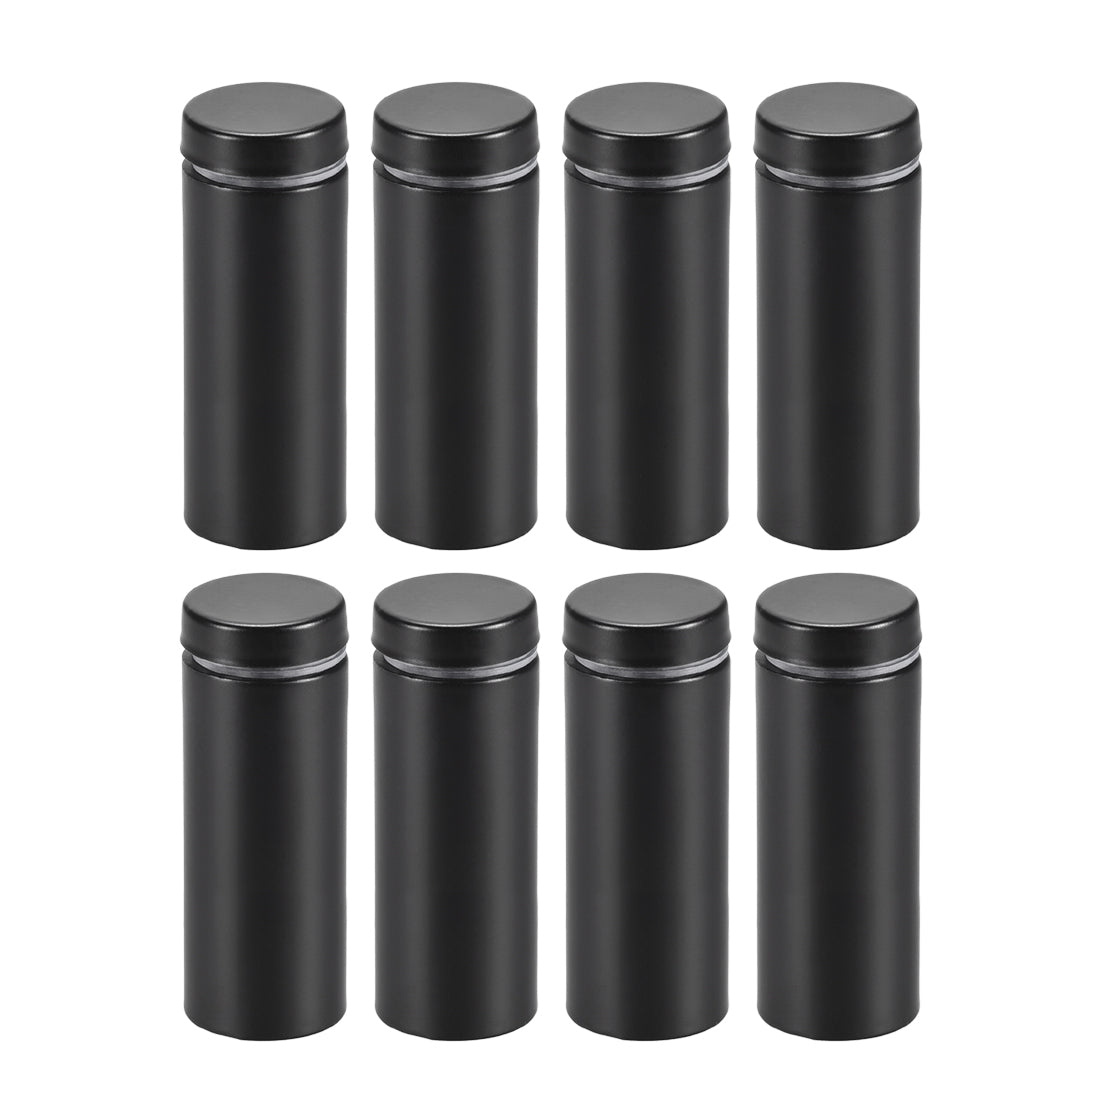 uxcell Uxcell Glass Standoff Mount Stainless Steel Wall Standoff Holder Advertising Nails 19mm Dia 51mm Length Black , 8 Pcs